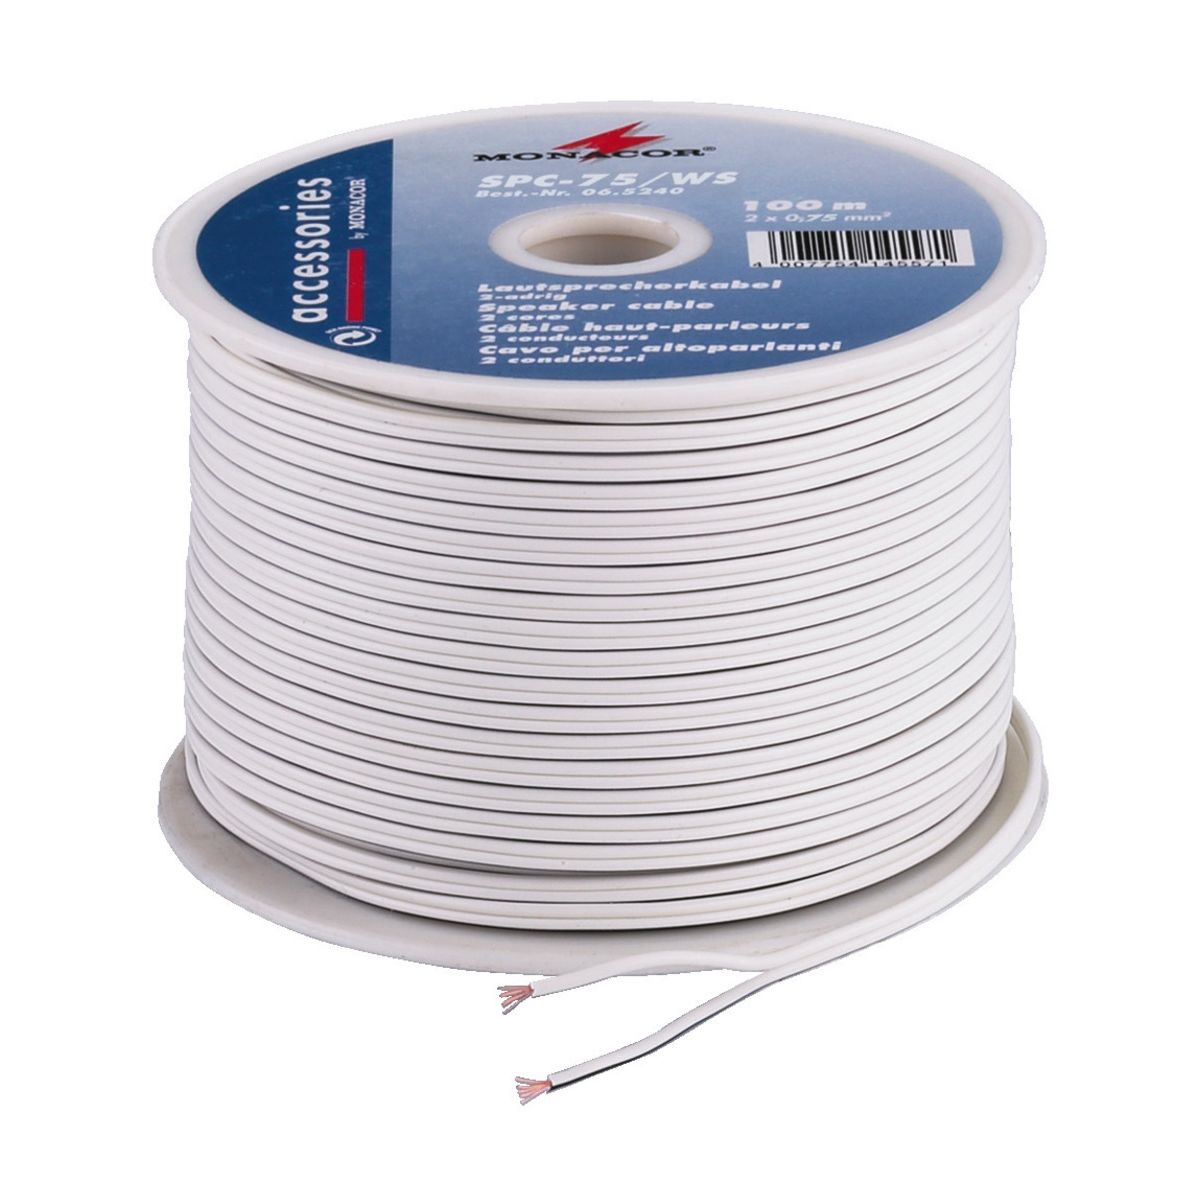 SPC-75/WS | Speaker cable “STANDARD QUALITY”, 2 x 0.75 mm2, 100 m-5935